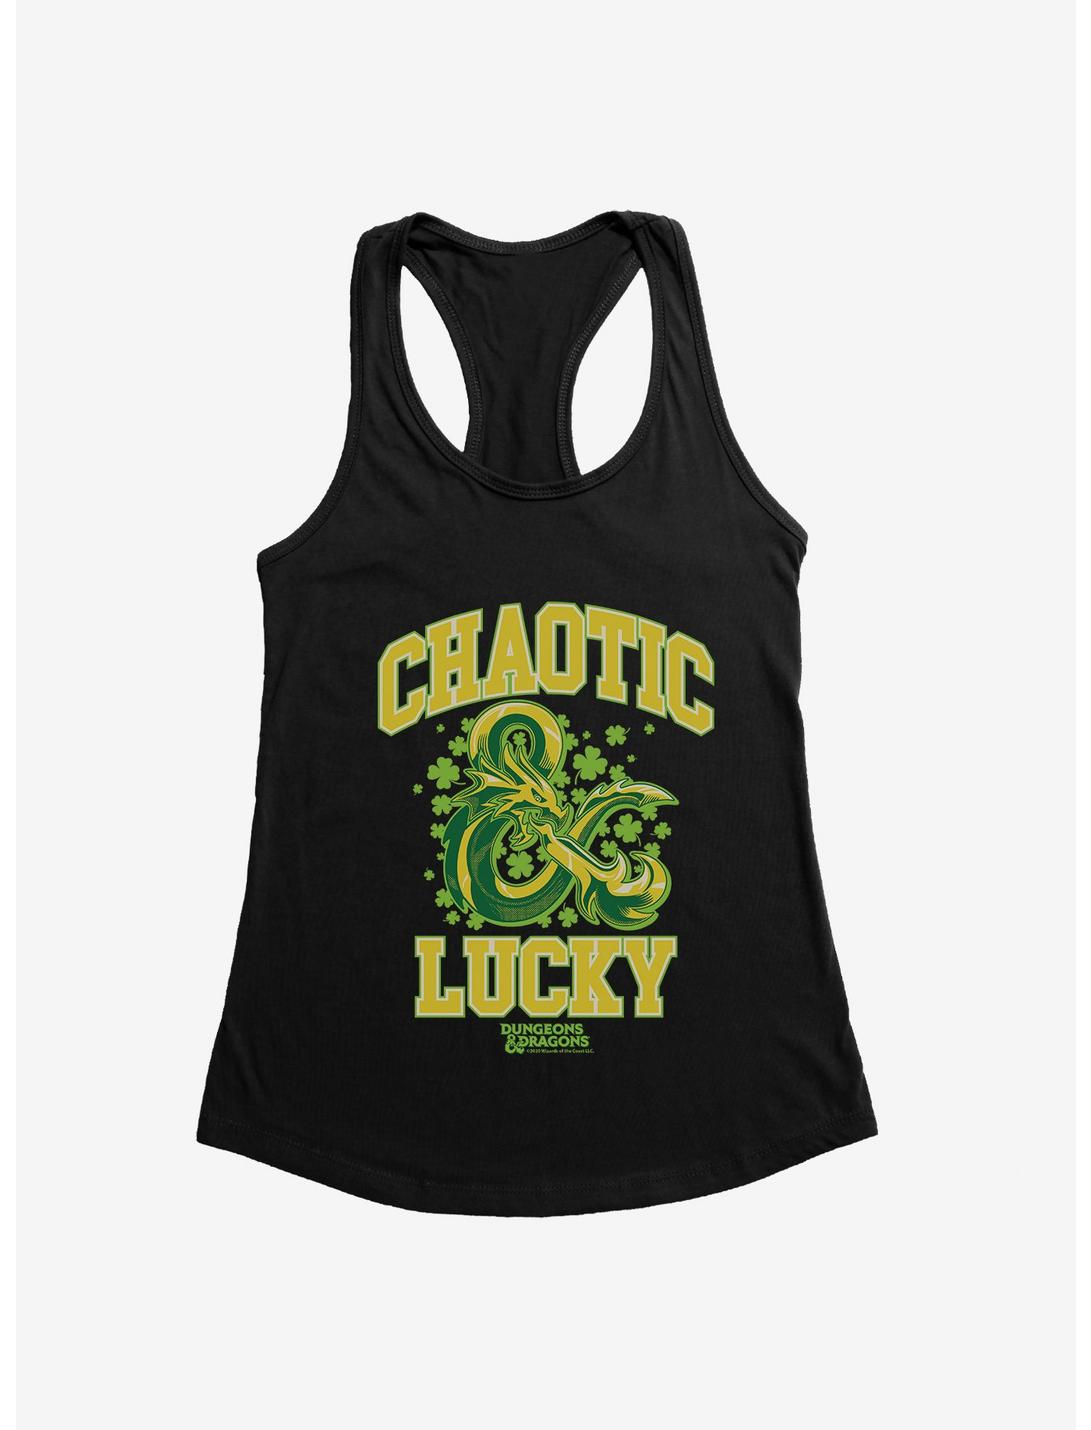 Dungeons & Dragons Chaotic And Lucky Girls Tank, BLACK, hi-res